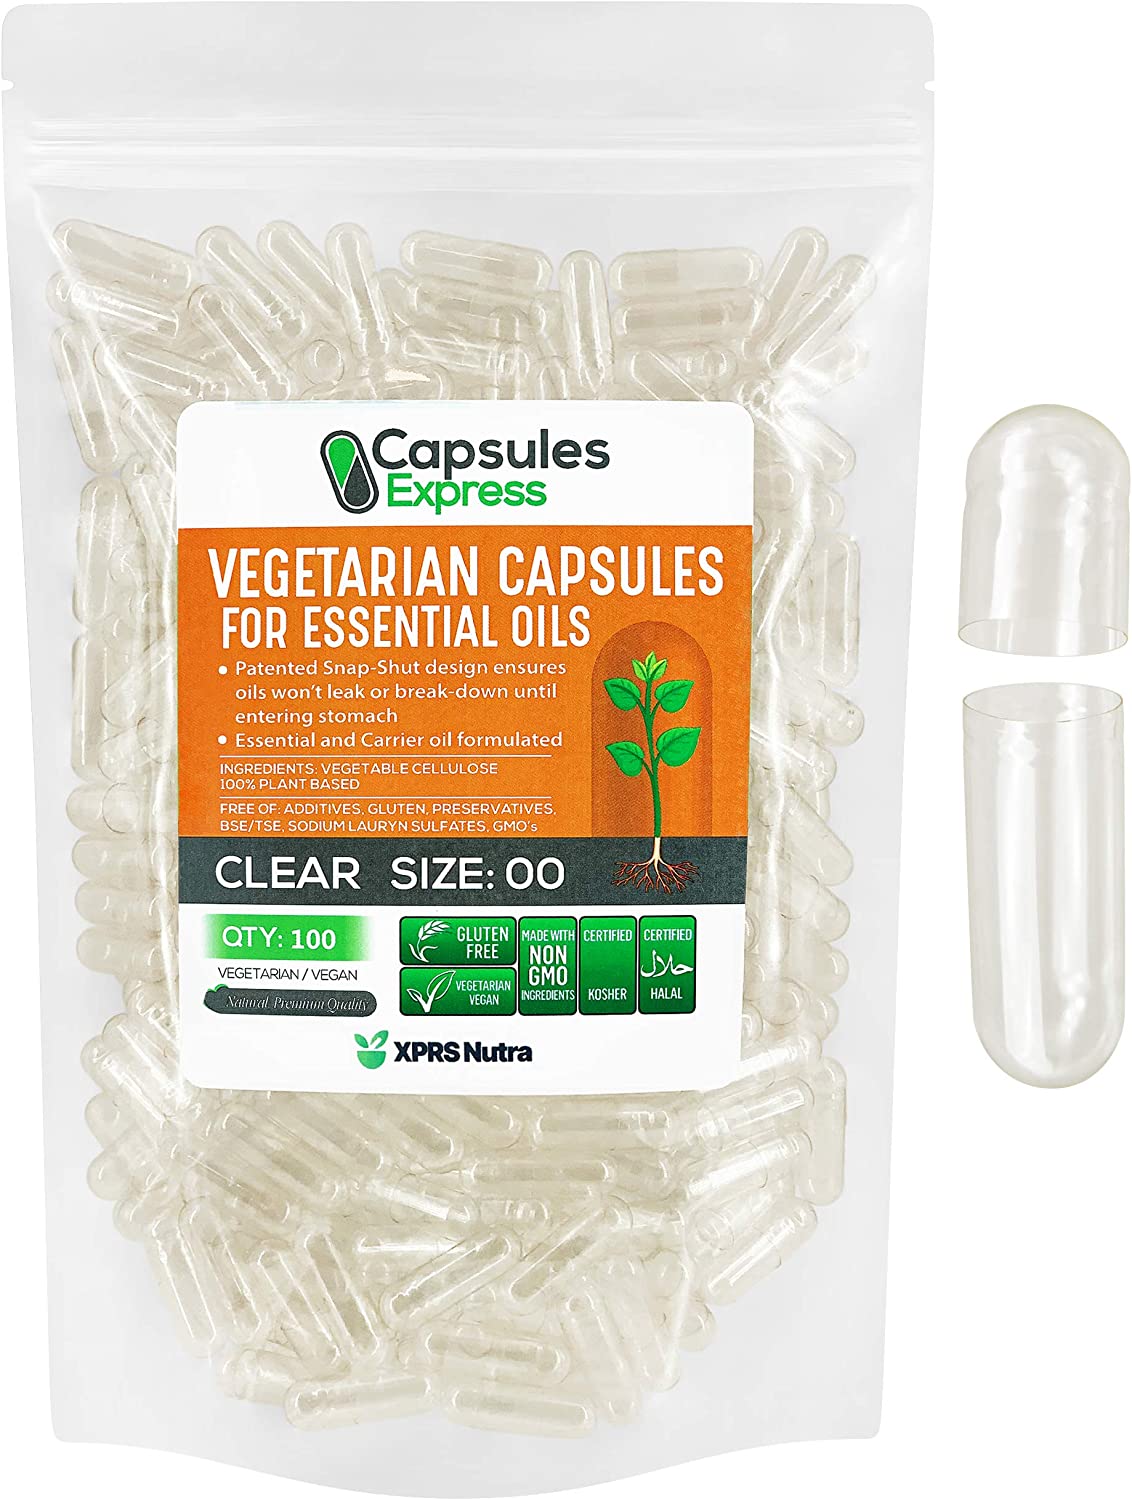 Size 00 Clear Empty Vegan Capsules for Essential Oils